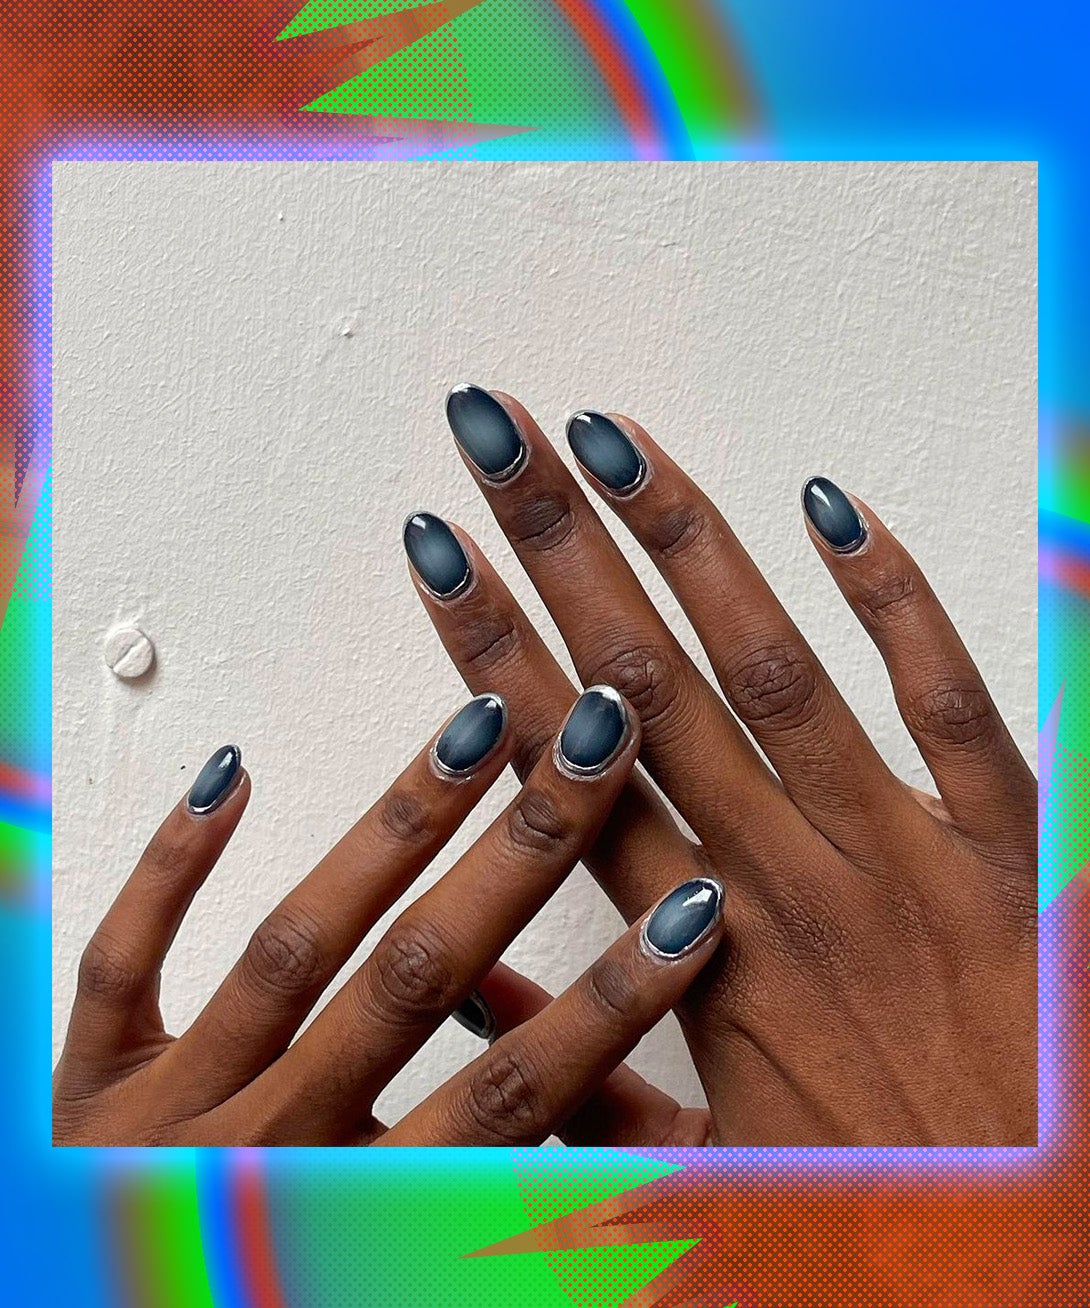 Chic Modern Nails To Try in 2023 - Nail Designs Journal